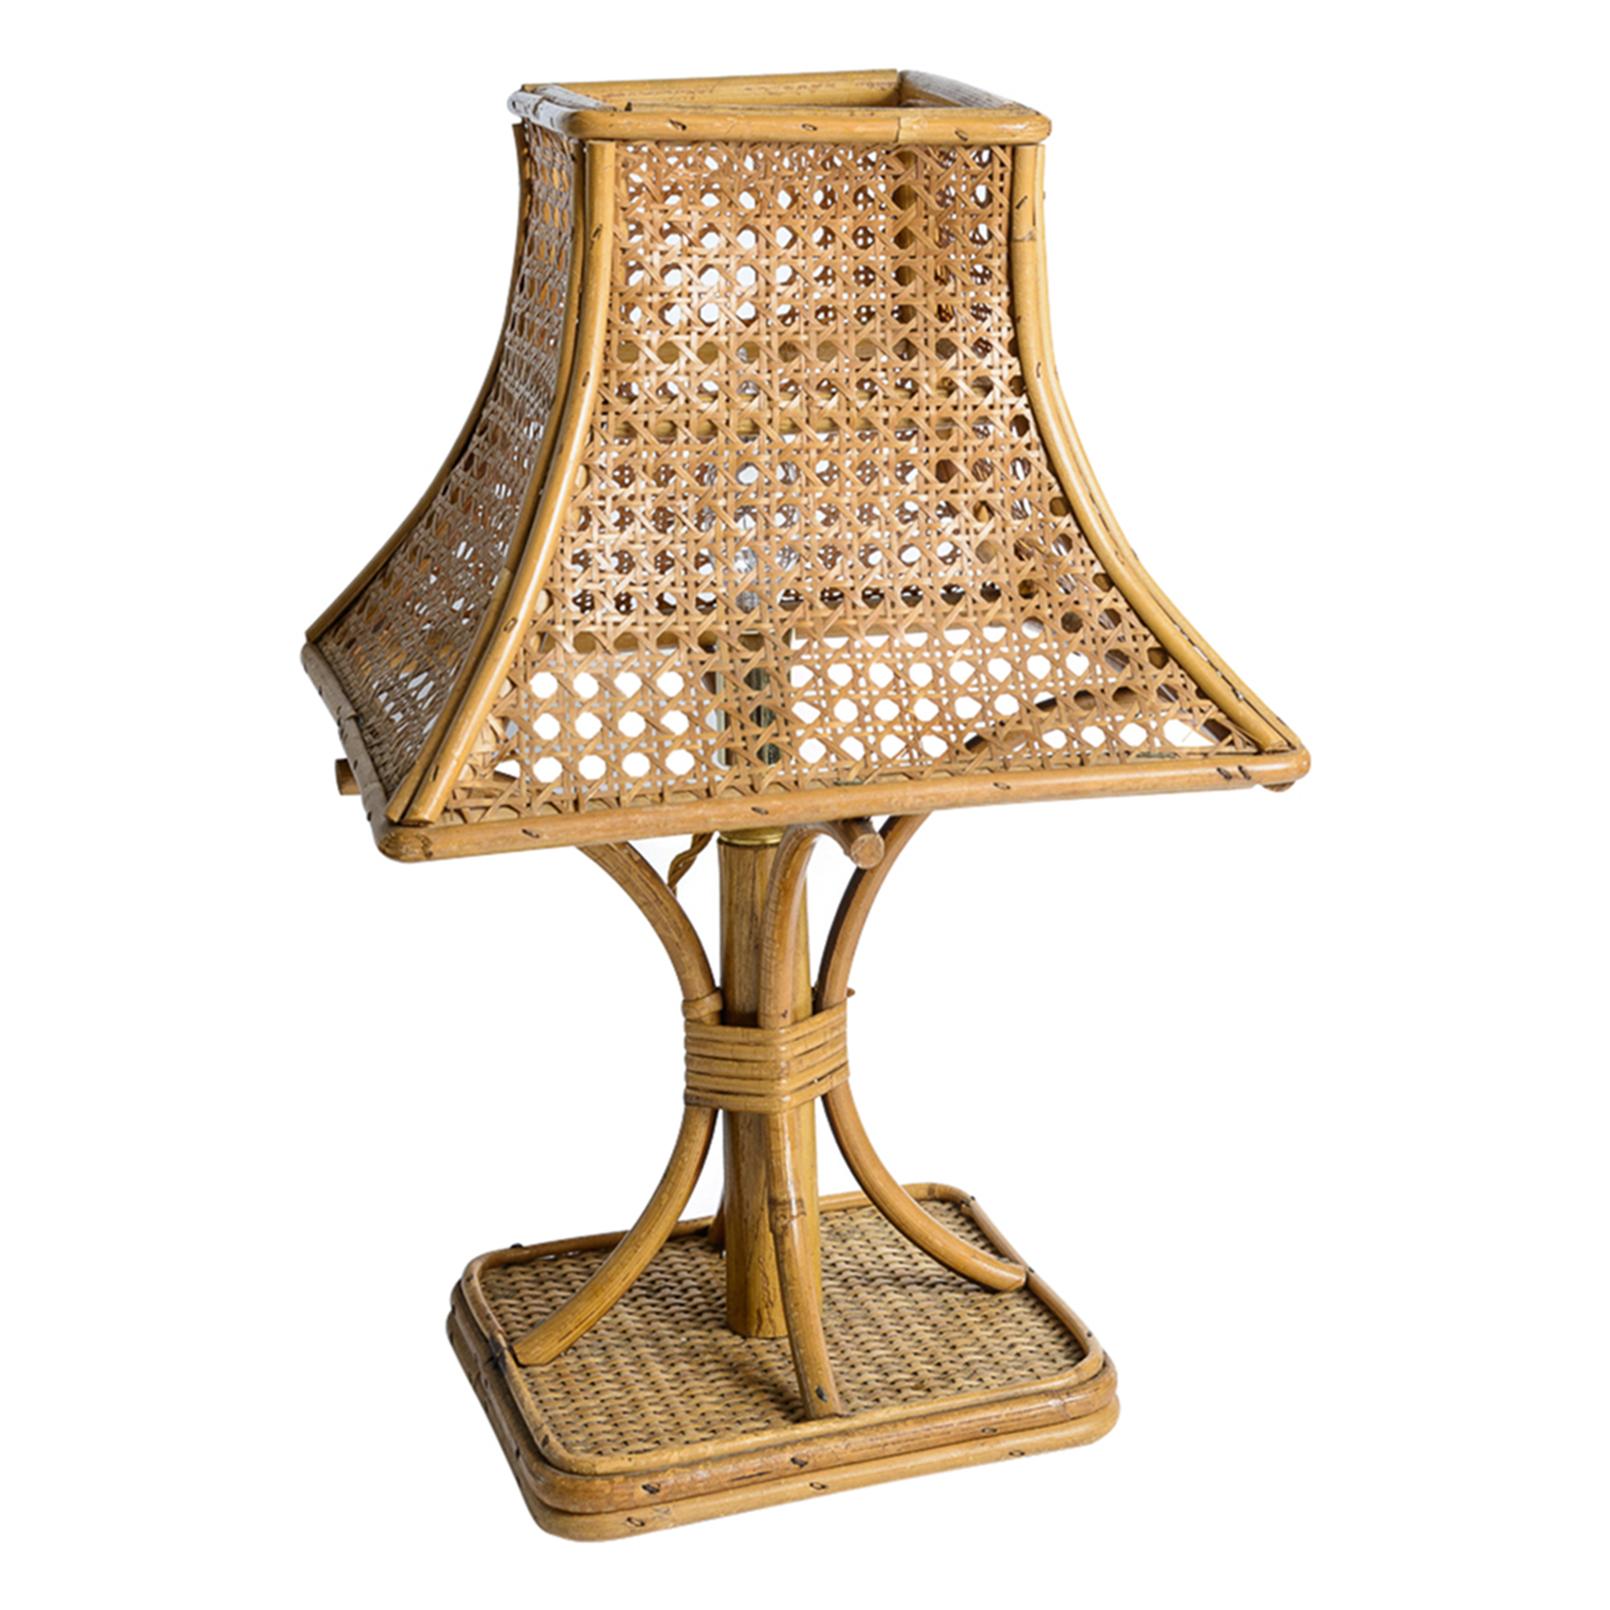 Just is this petite French Riviera Table lamp, 1950s
Made with Bamboo and Rattan (Rotin in French) and with this wonderful Vienna Straw for the shade.
Very delicate and quite charming.
Recently rewired to US standards.
Very good antique condition,